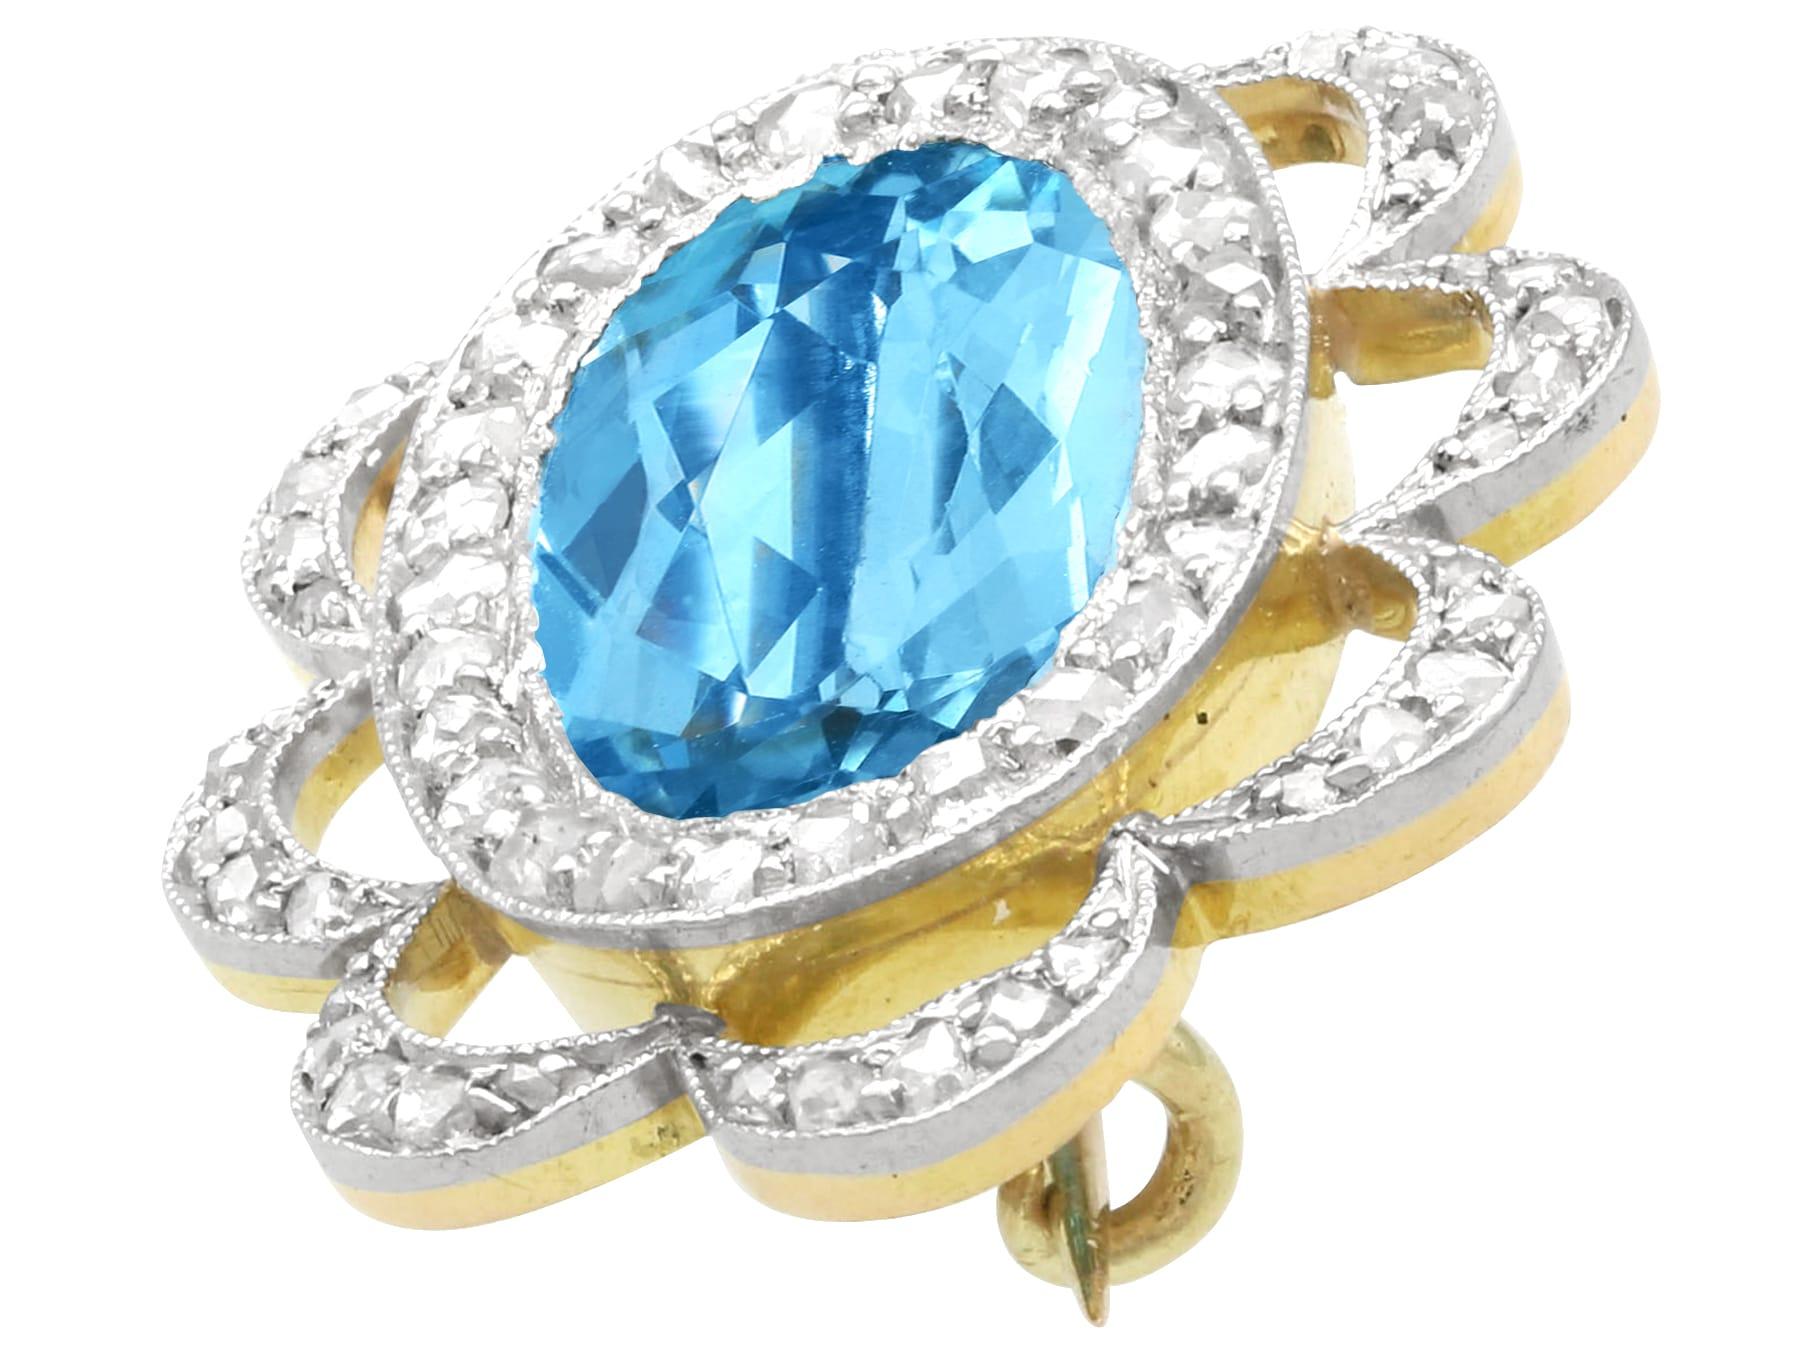 Late Victorian 1900s 3.55 Carat Aquamarine and 0.59 Carat Diamond 15k Yellow Gold Brooch  For Sale